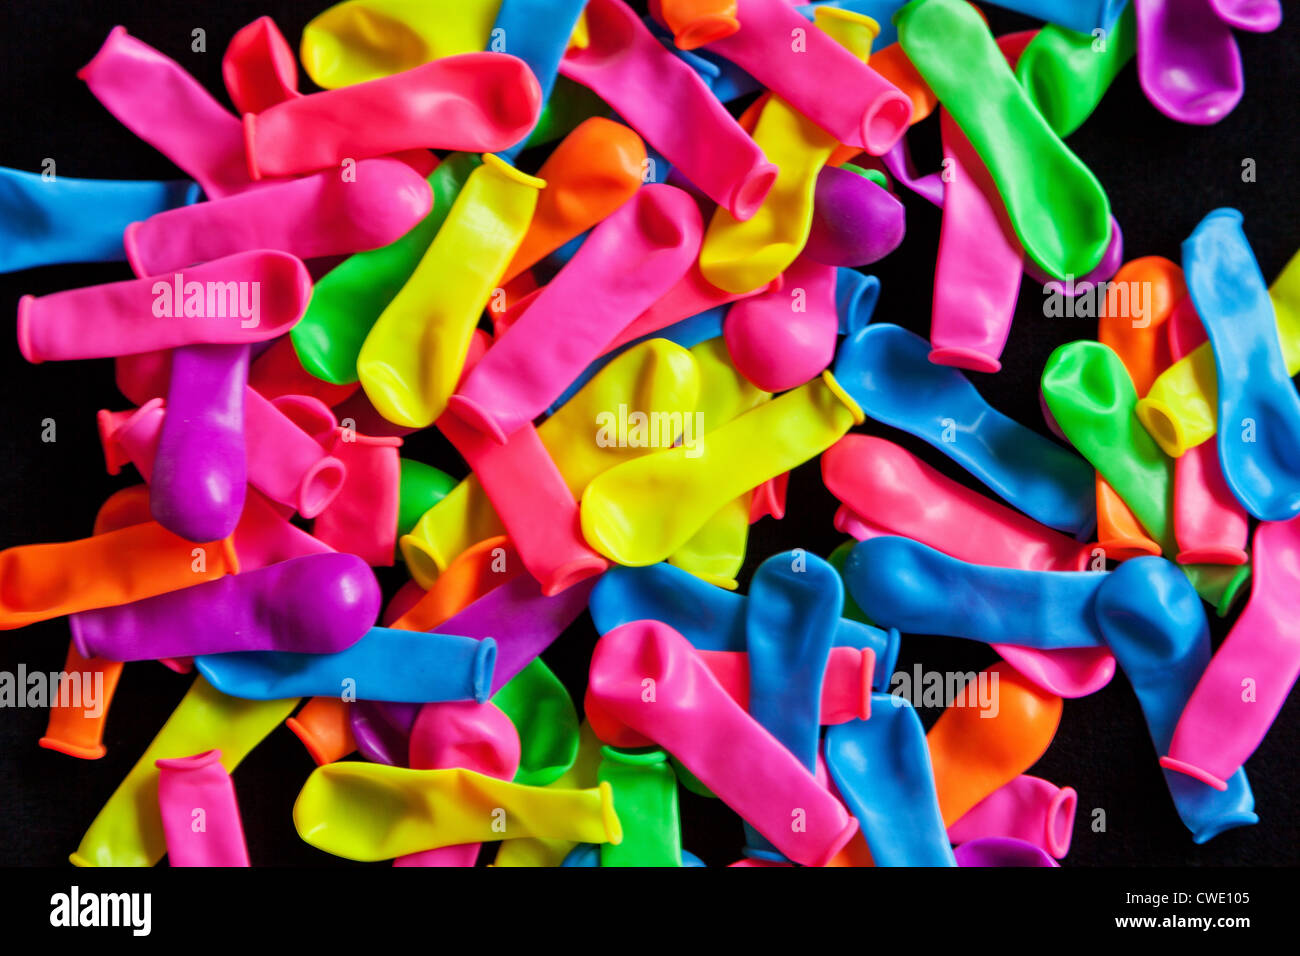 A pile of deflated balloons on a black background, Stock Photo